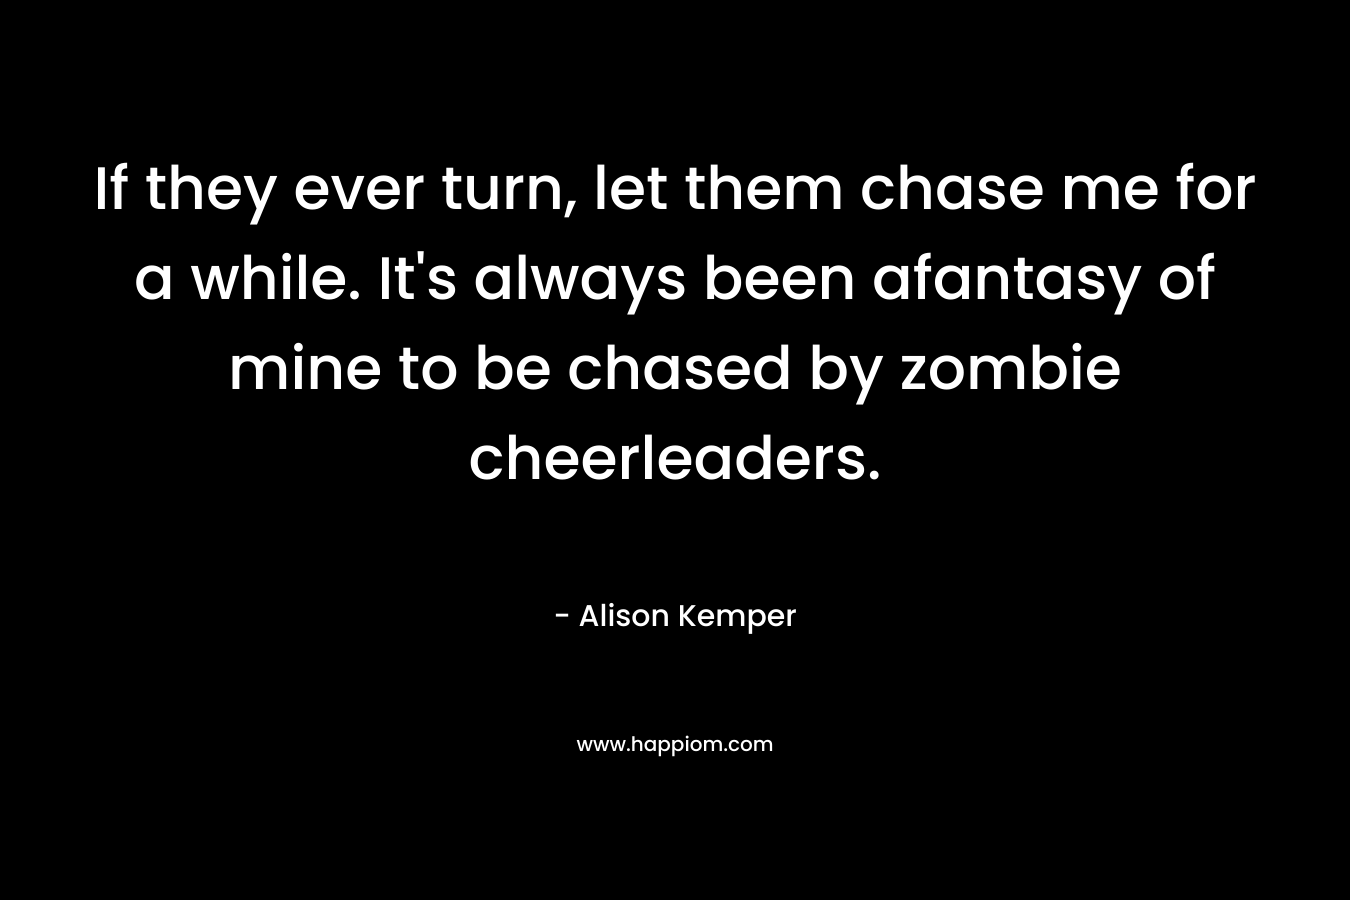 If they ever turn, let them chase me for a while. It’s always been afantasy of mine to be chased by zombie cheerleaders. – Alison Kemper